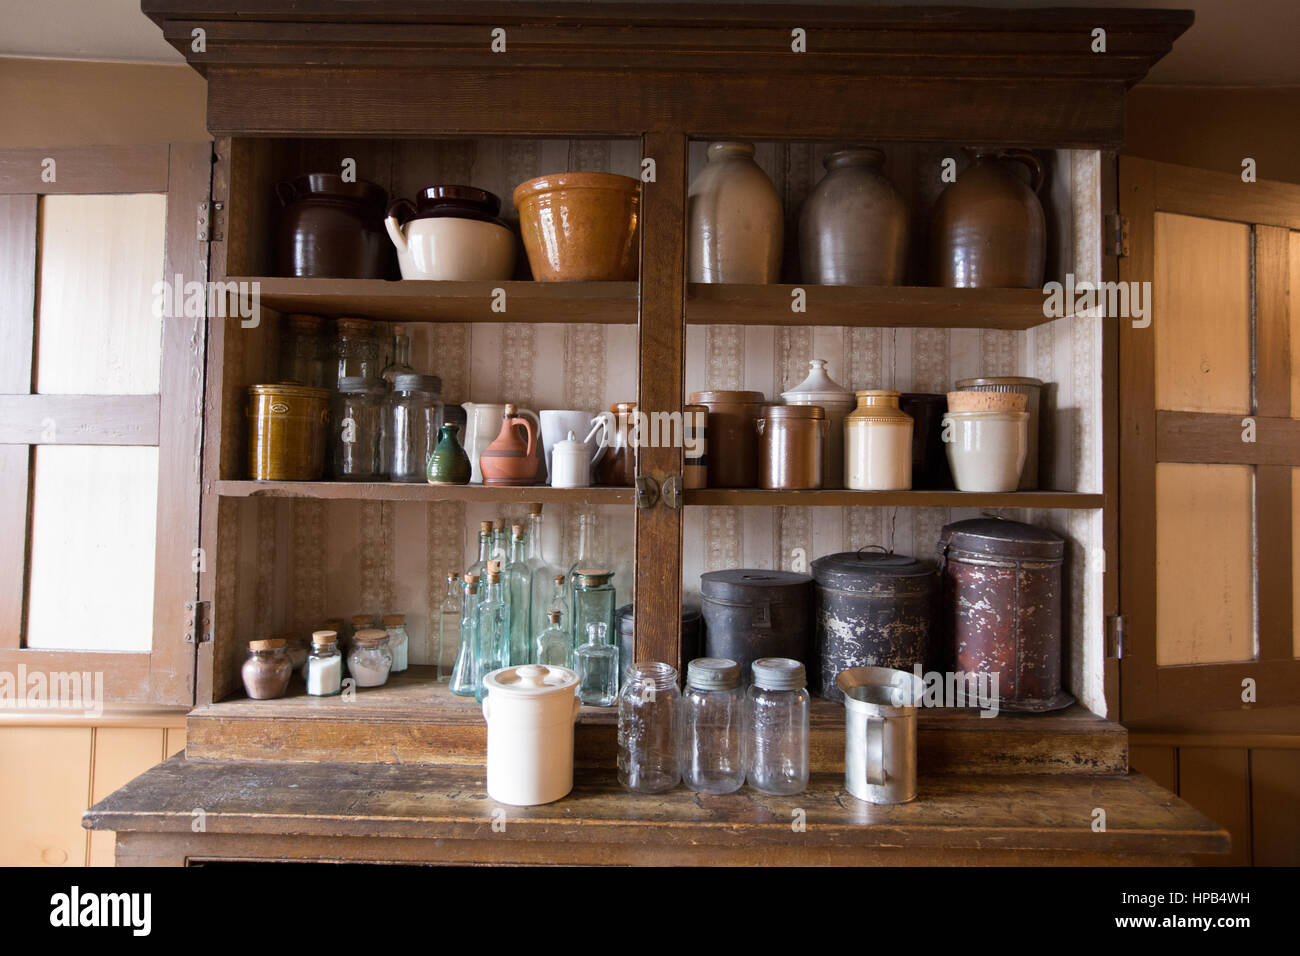 Vintage Kitchen Cabinet High Resolution Stock Photography And Images Alamy